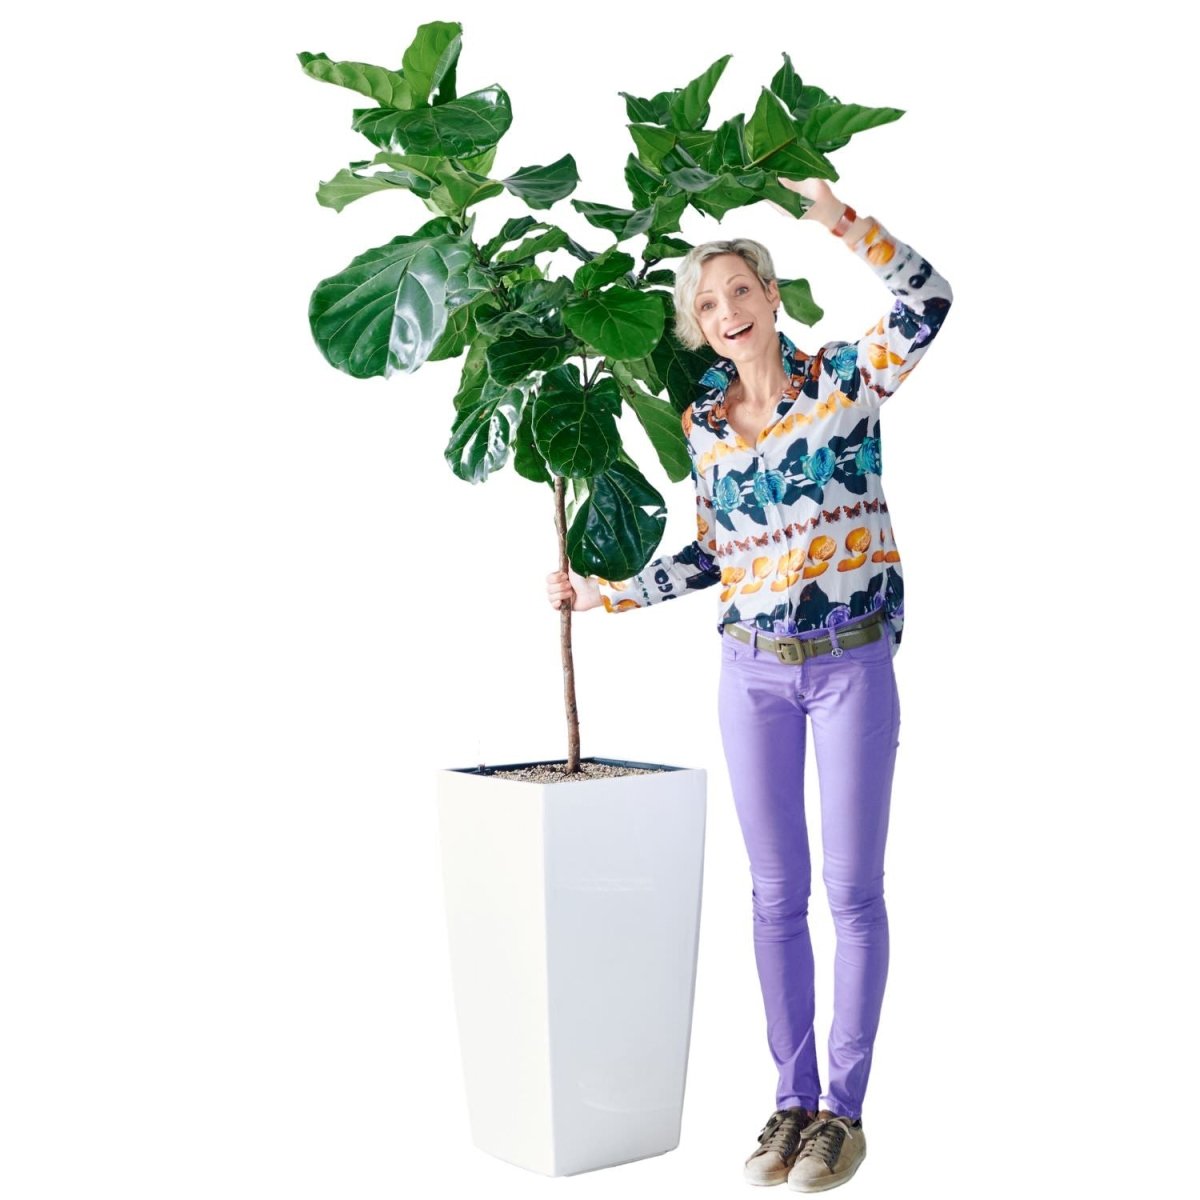 Fiddle Leaf Fig Tree Potted In Lechuza Cubico 40 - White - My City Plants